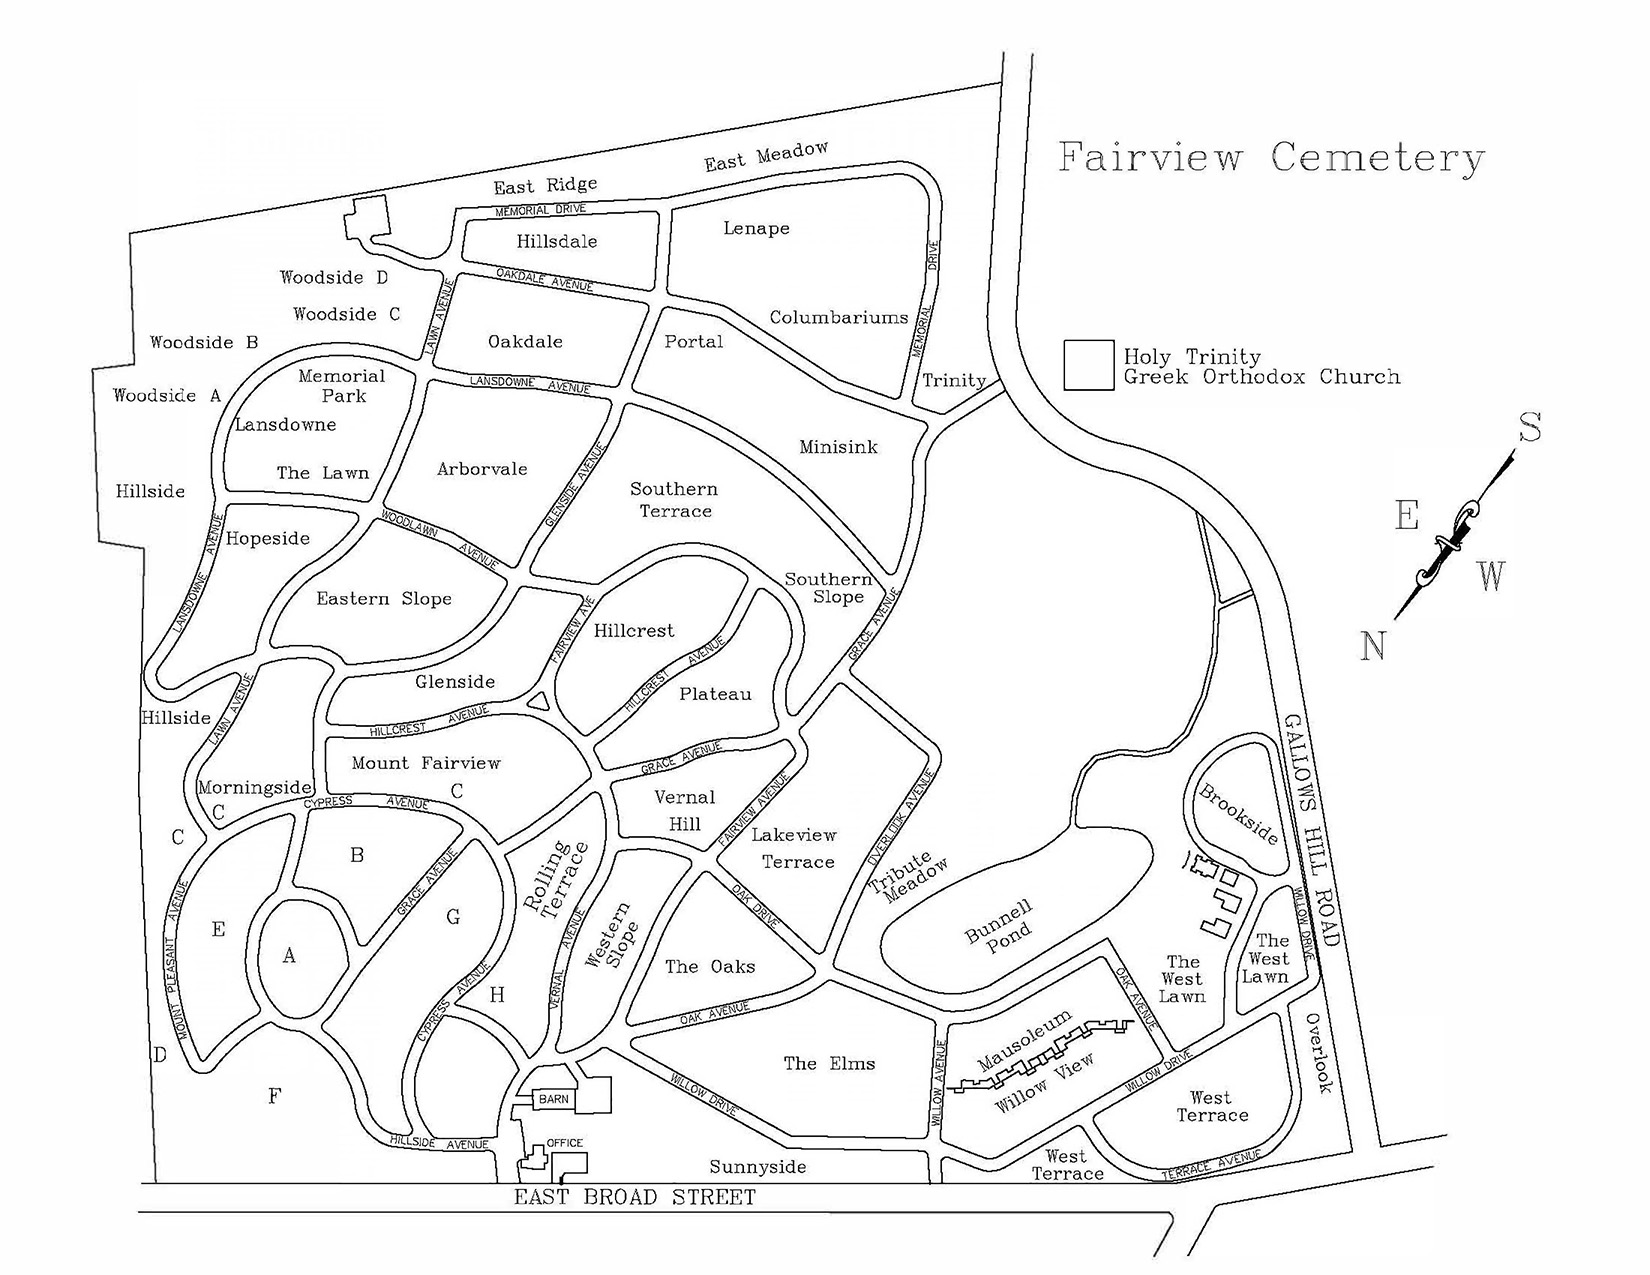 Cemetery map of Fairview Cemetery in Westfield, New Jersey.